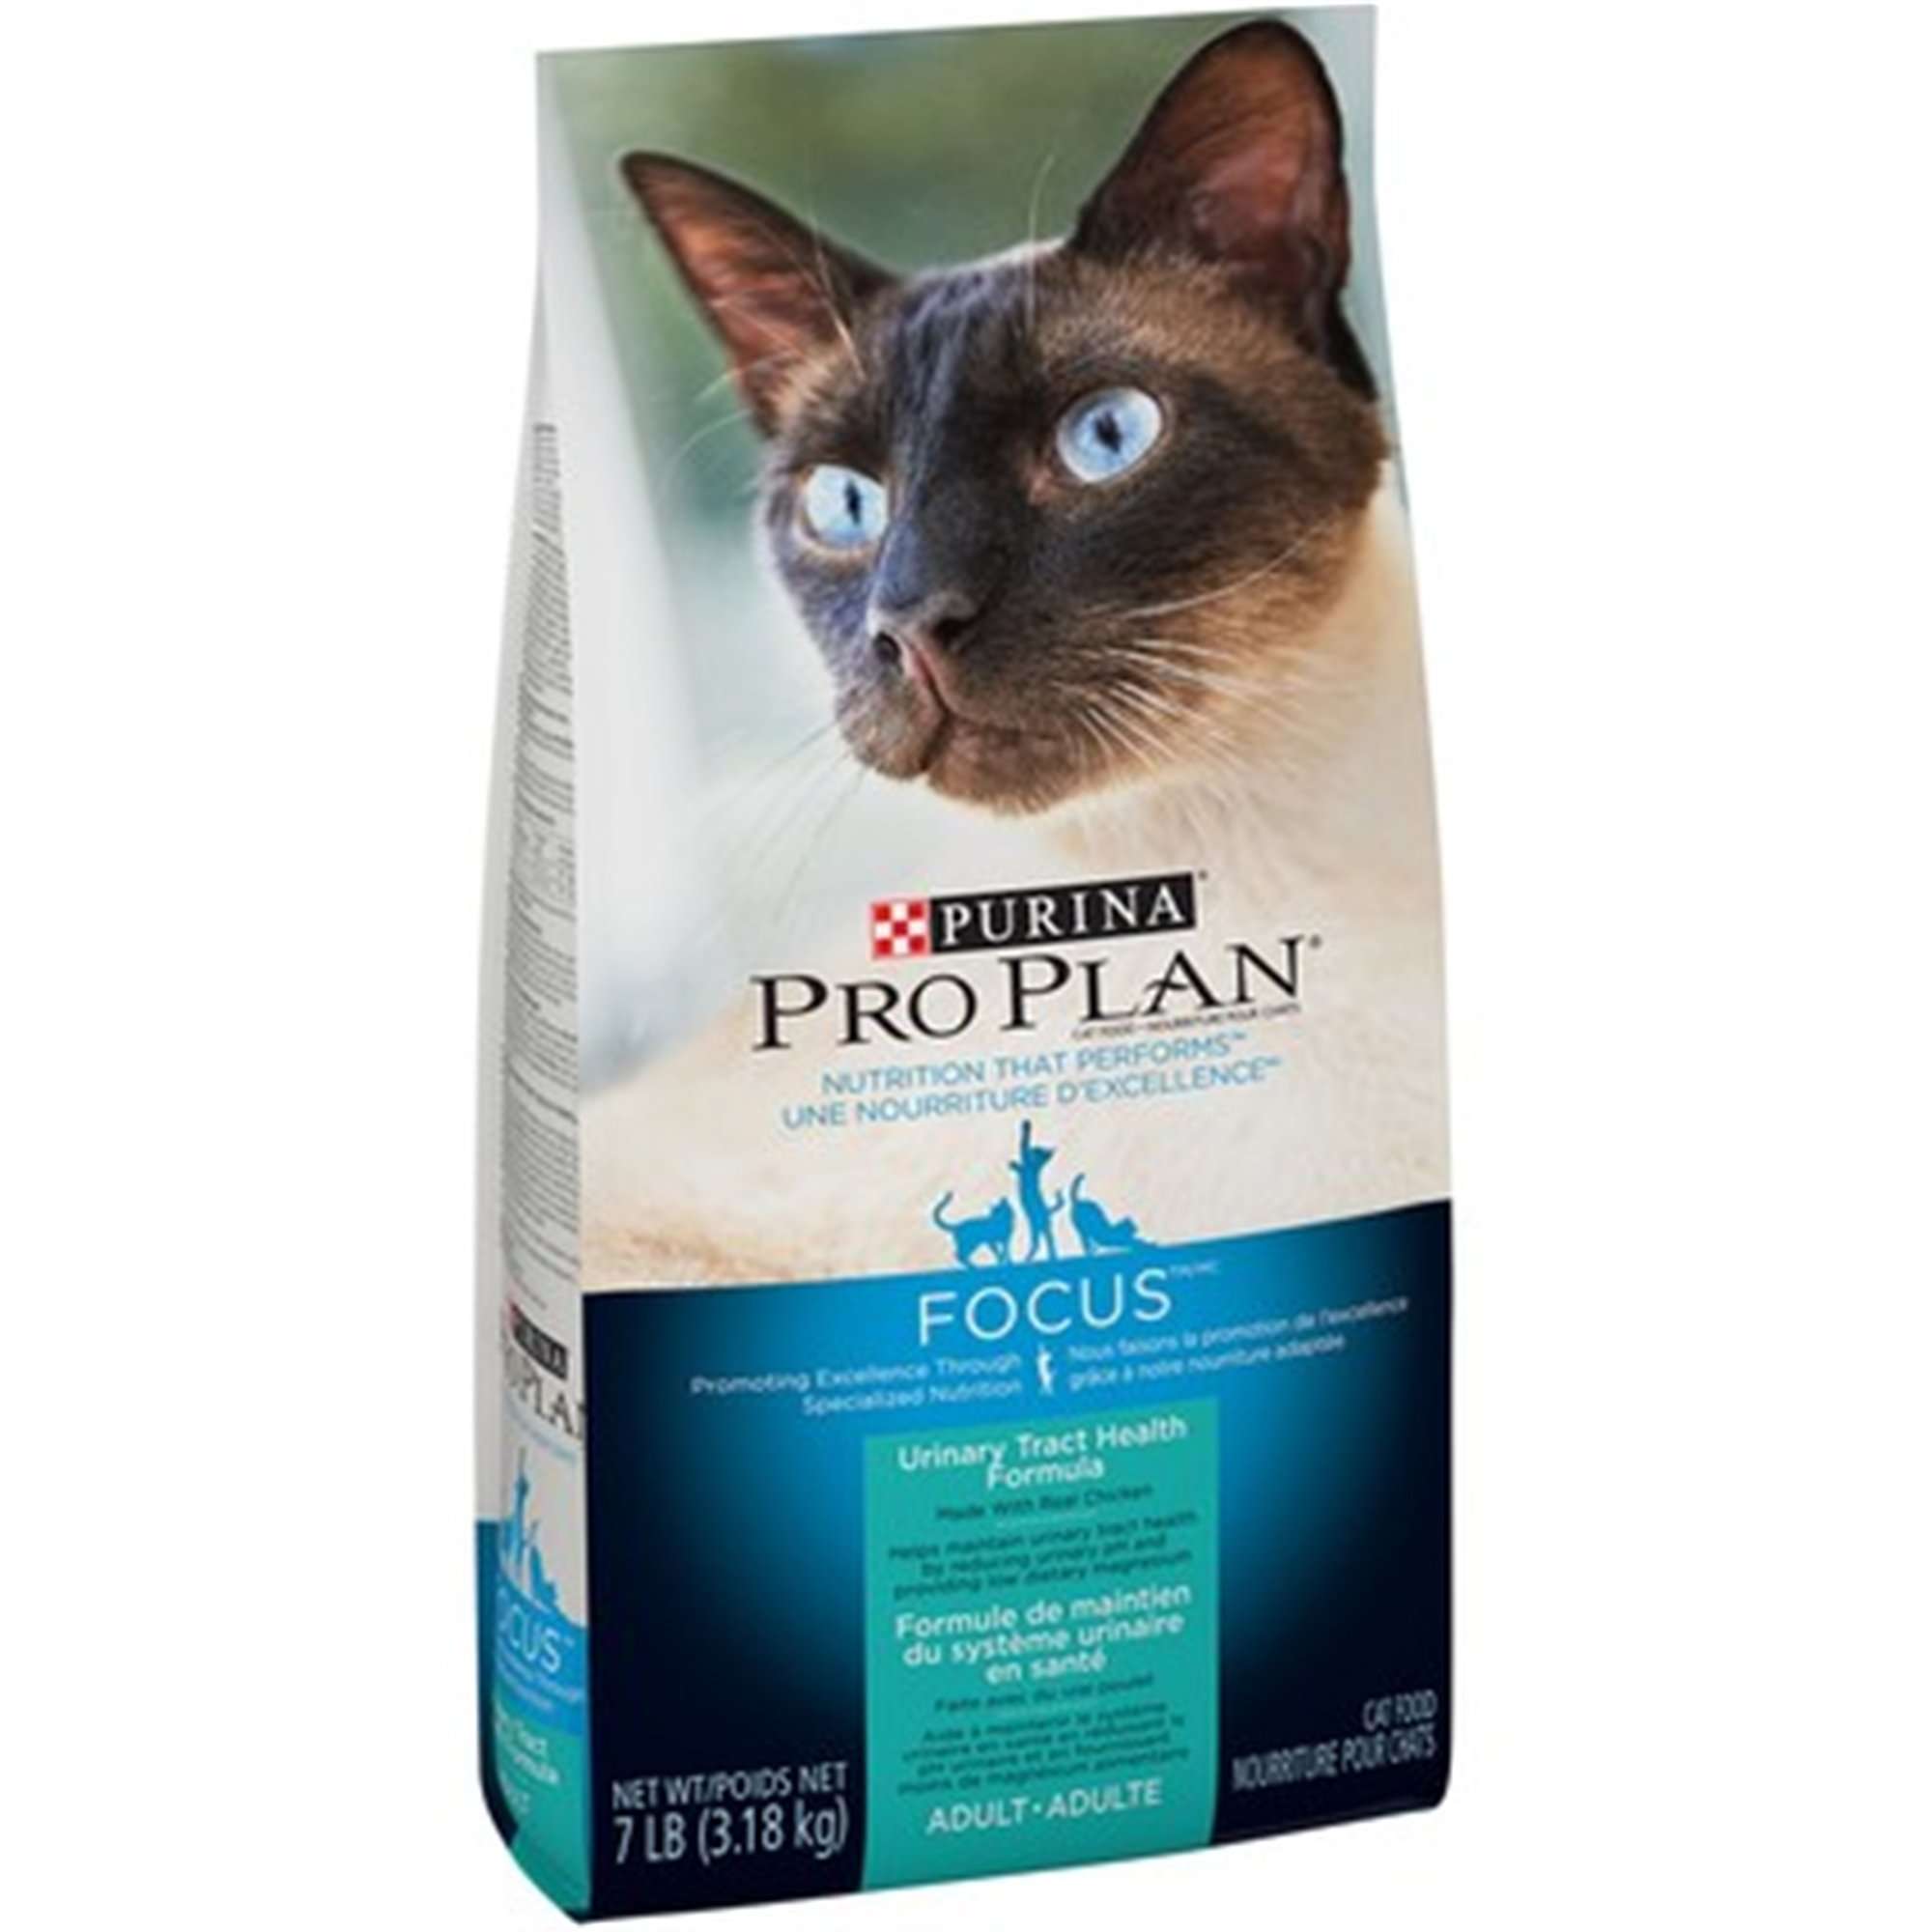 PRO PLAN URINARY TRACT HEALTH CAT FOOD 3.18KG